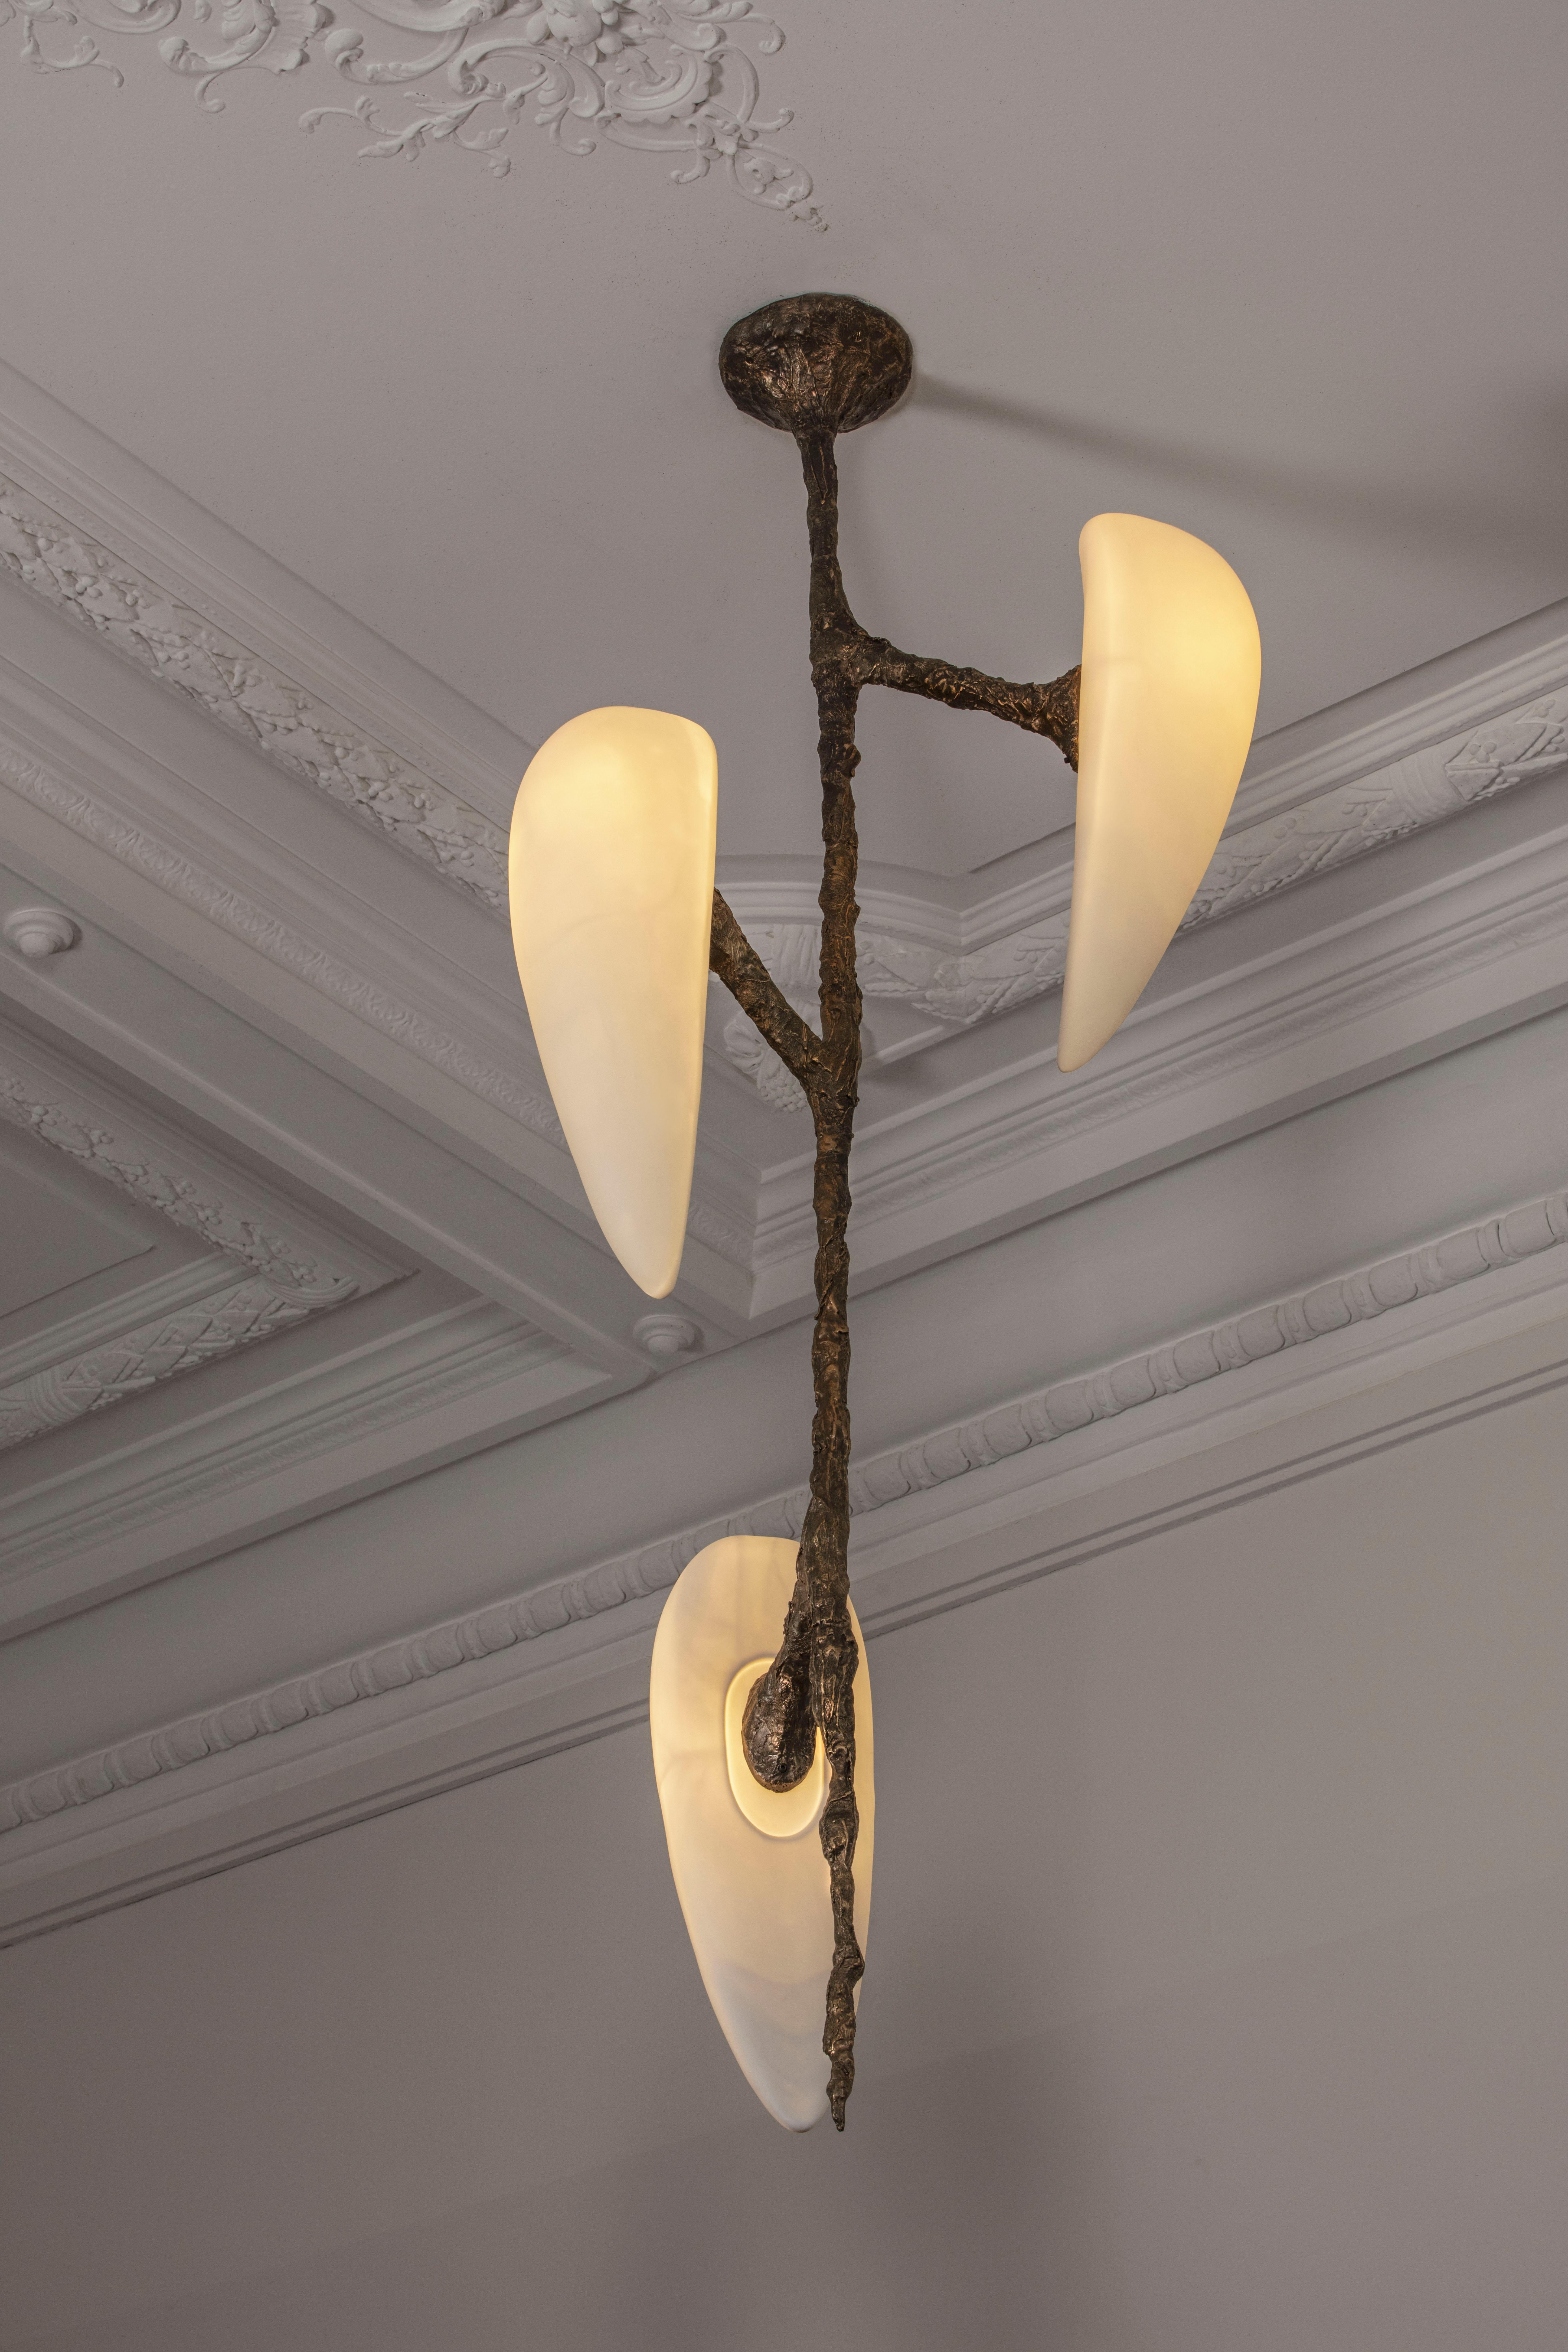 Unique Cast Bronze Chandelier Sculpted by William Guillon
LV-426
Dimensions: H 135 x 55 x 55 cm
Materials: Cast bronze, Porcelain

Dimensions can be customized, please contact us.

LV426 refers to the name of the planet visited by the crew in